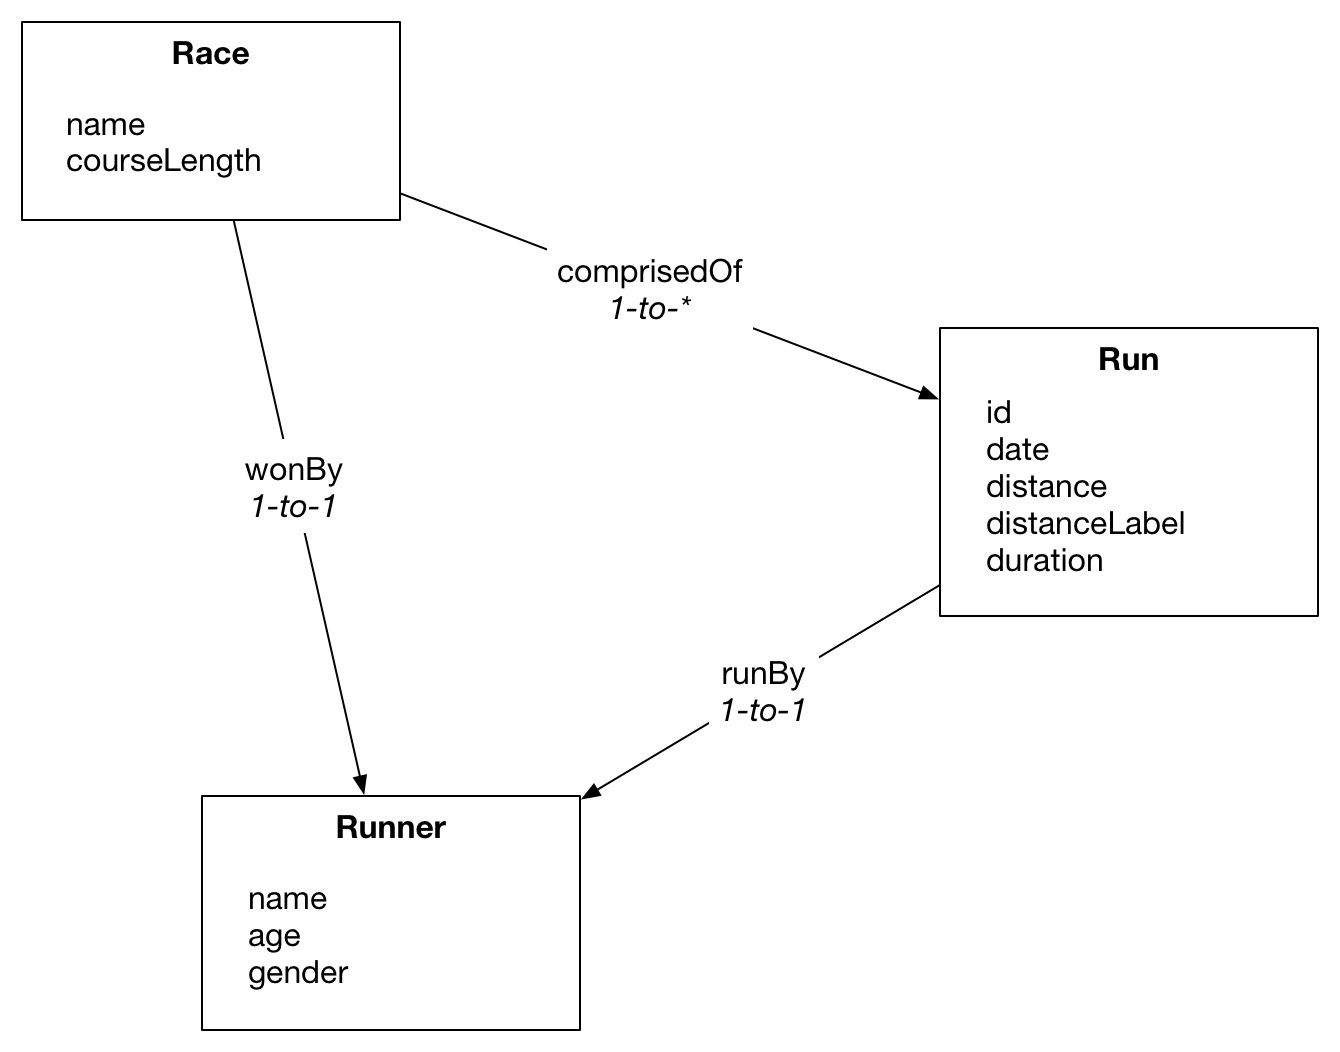 Example Entity Services implementation included in the repository covers three entities: Runner, Race, and Run, sourced from two different data sources